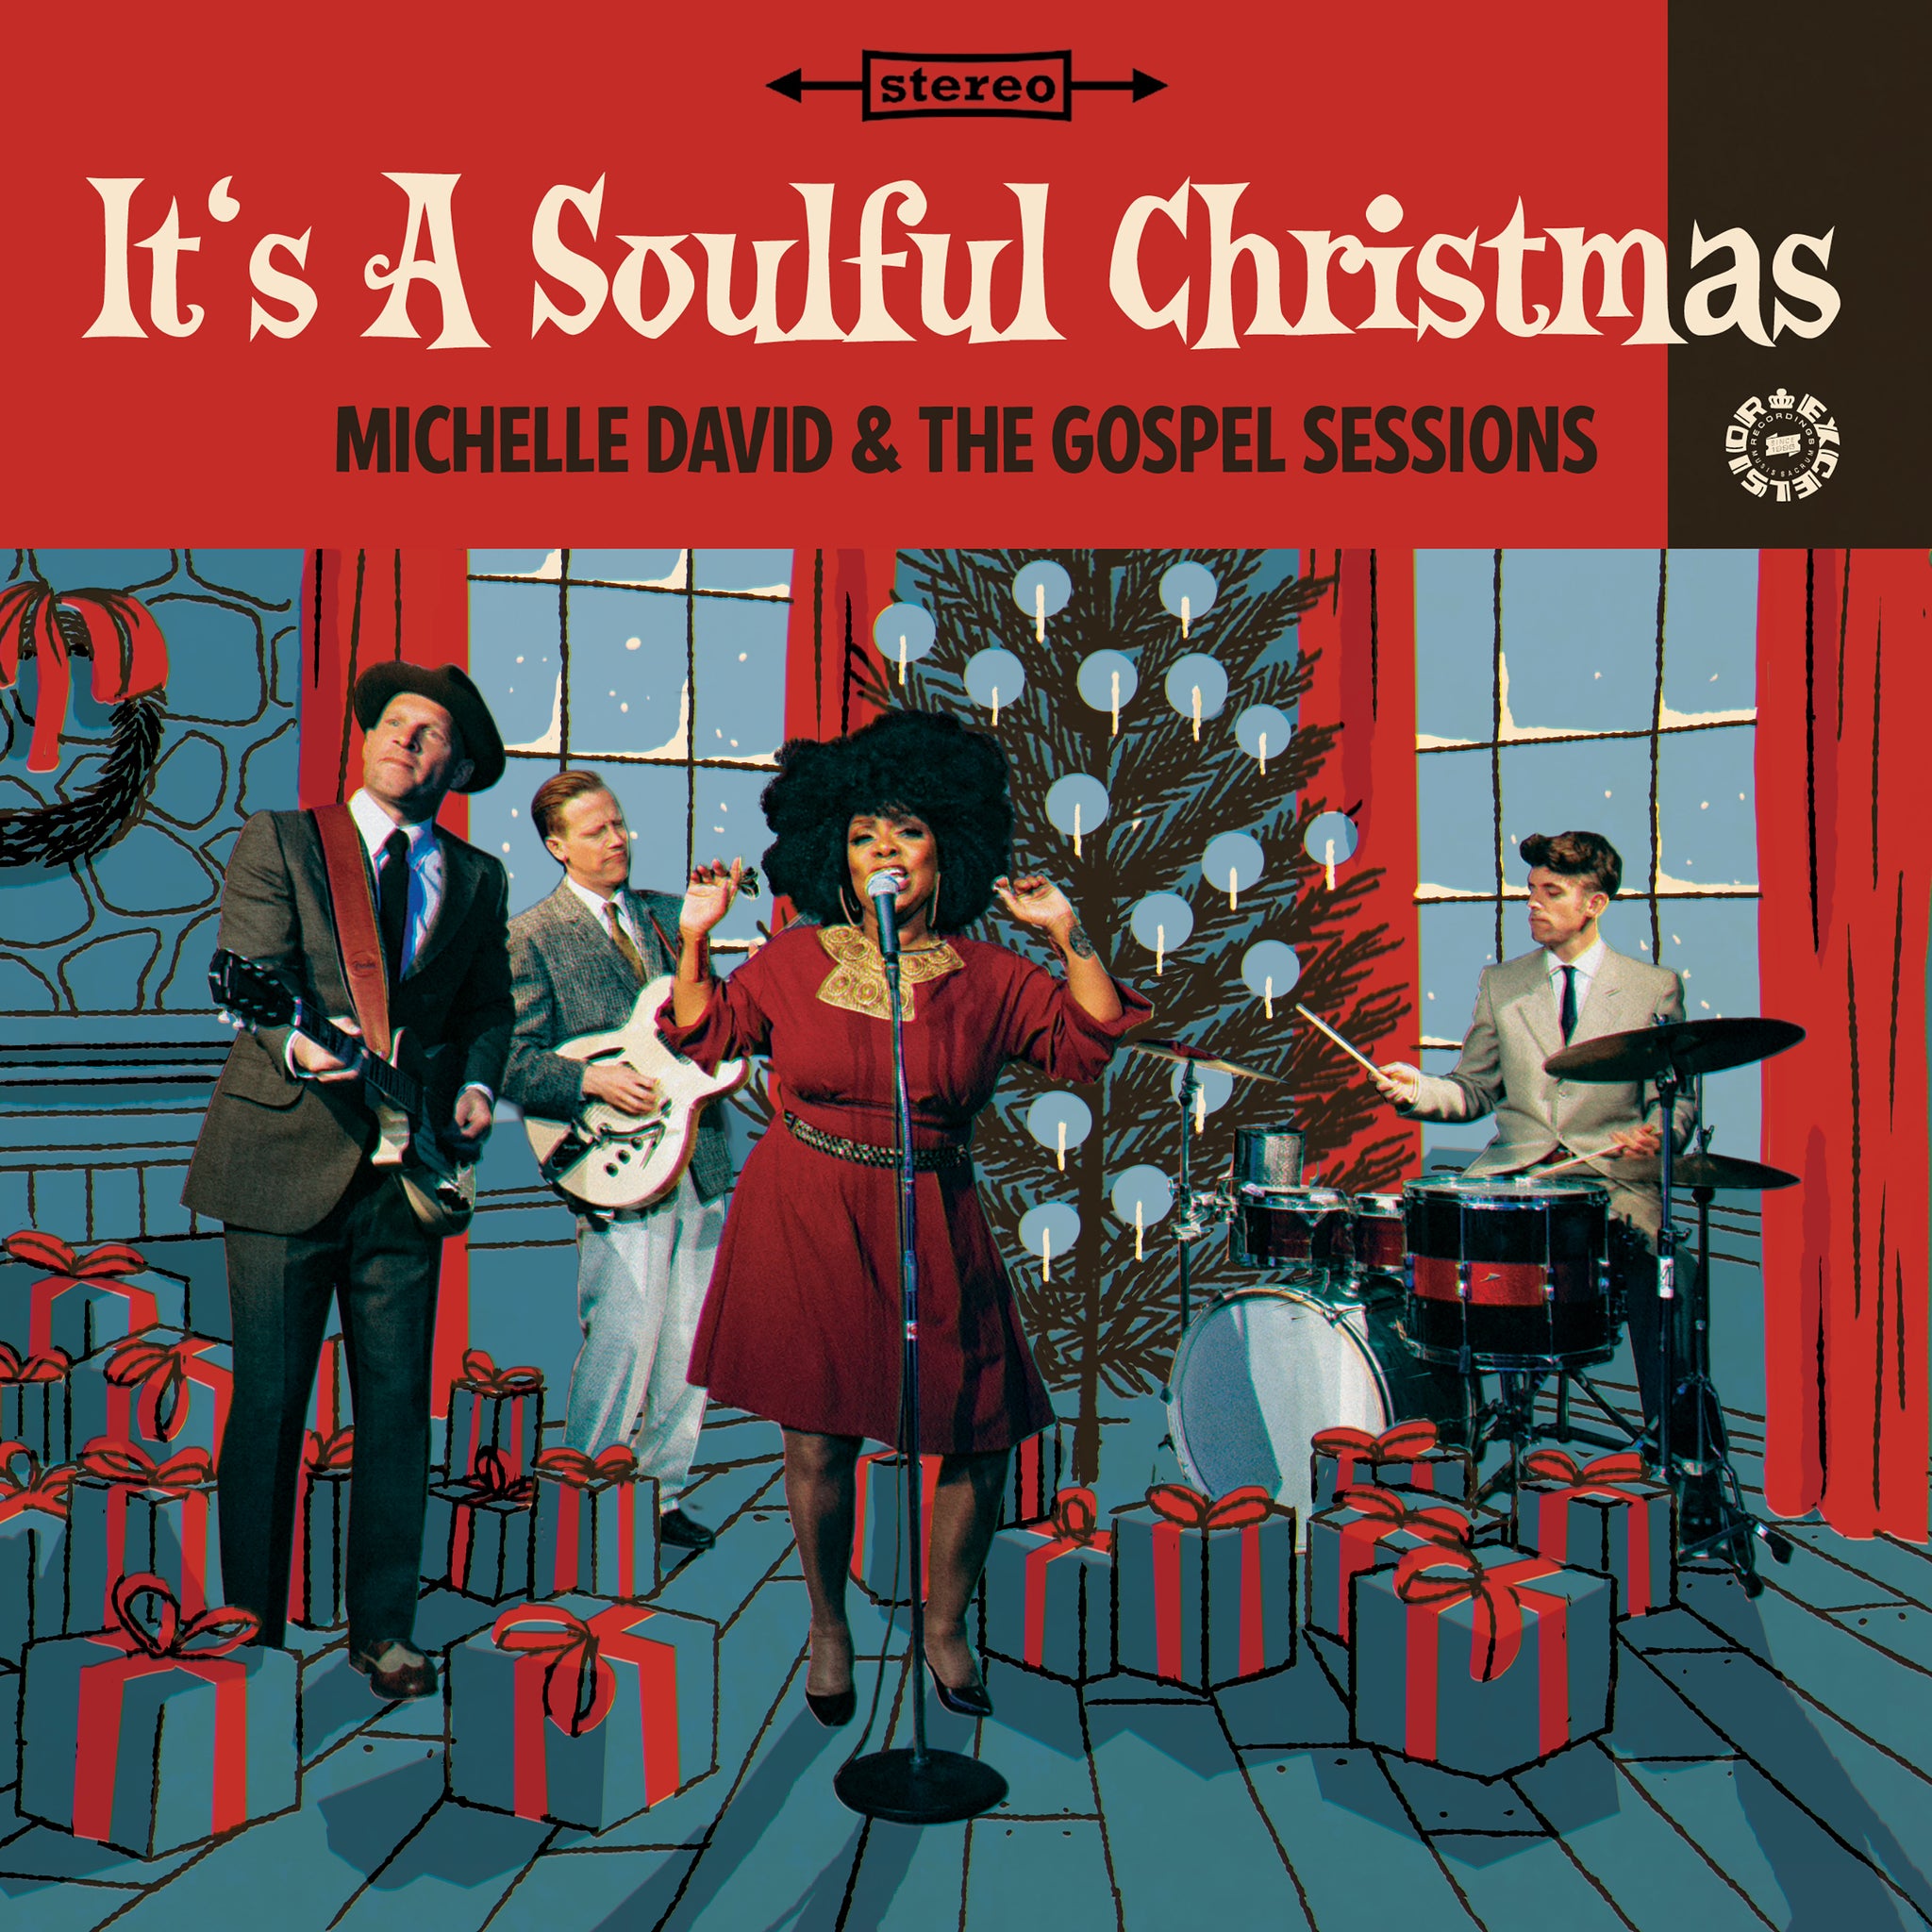 Michelle David & the Gospel Sessions - It's a Soulful Christmas